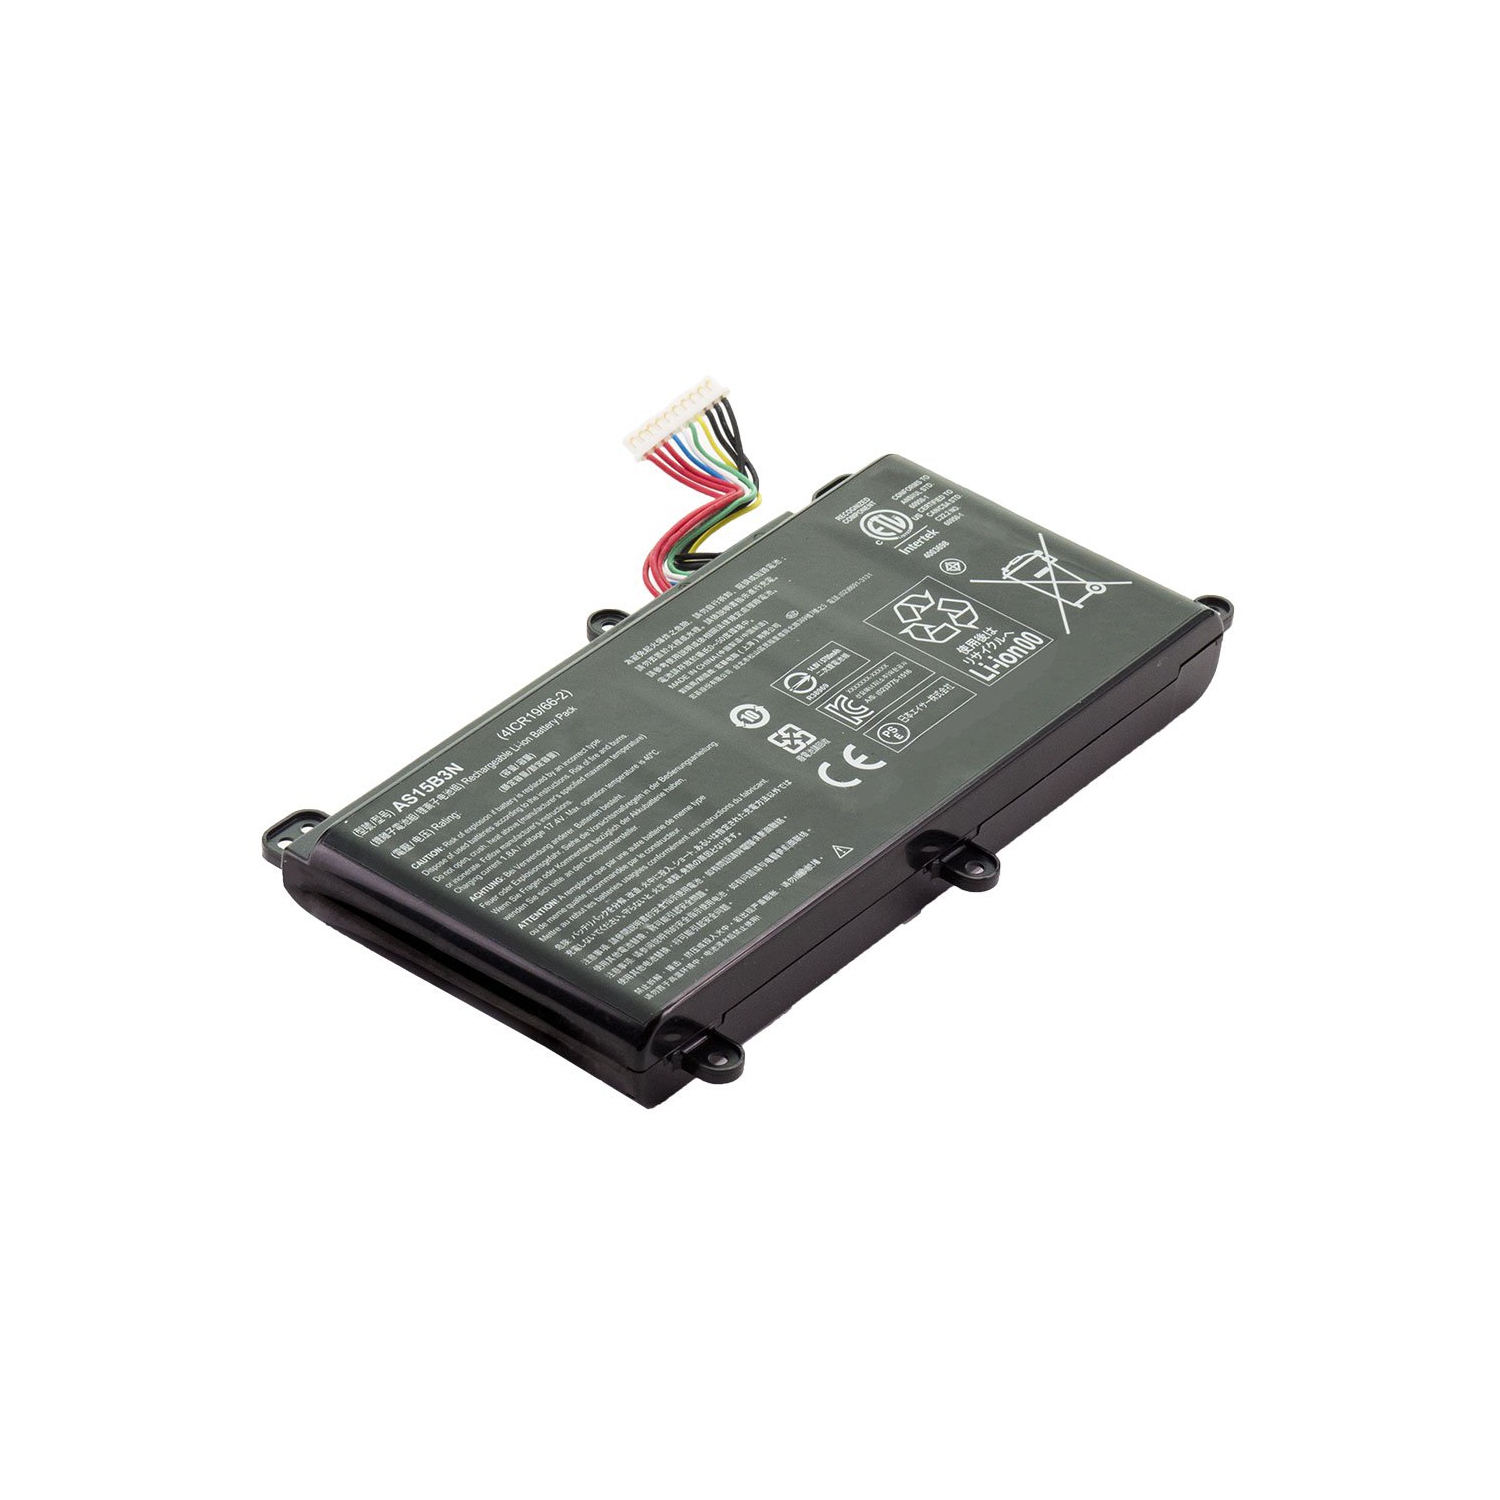 Laptop Battery Replacement for Acer Predator 15 G9-593-71EH, AS15B3N, KT.00803.004, KT.00803.005